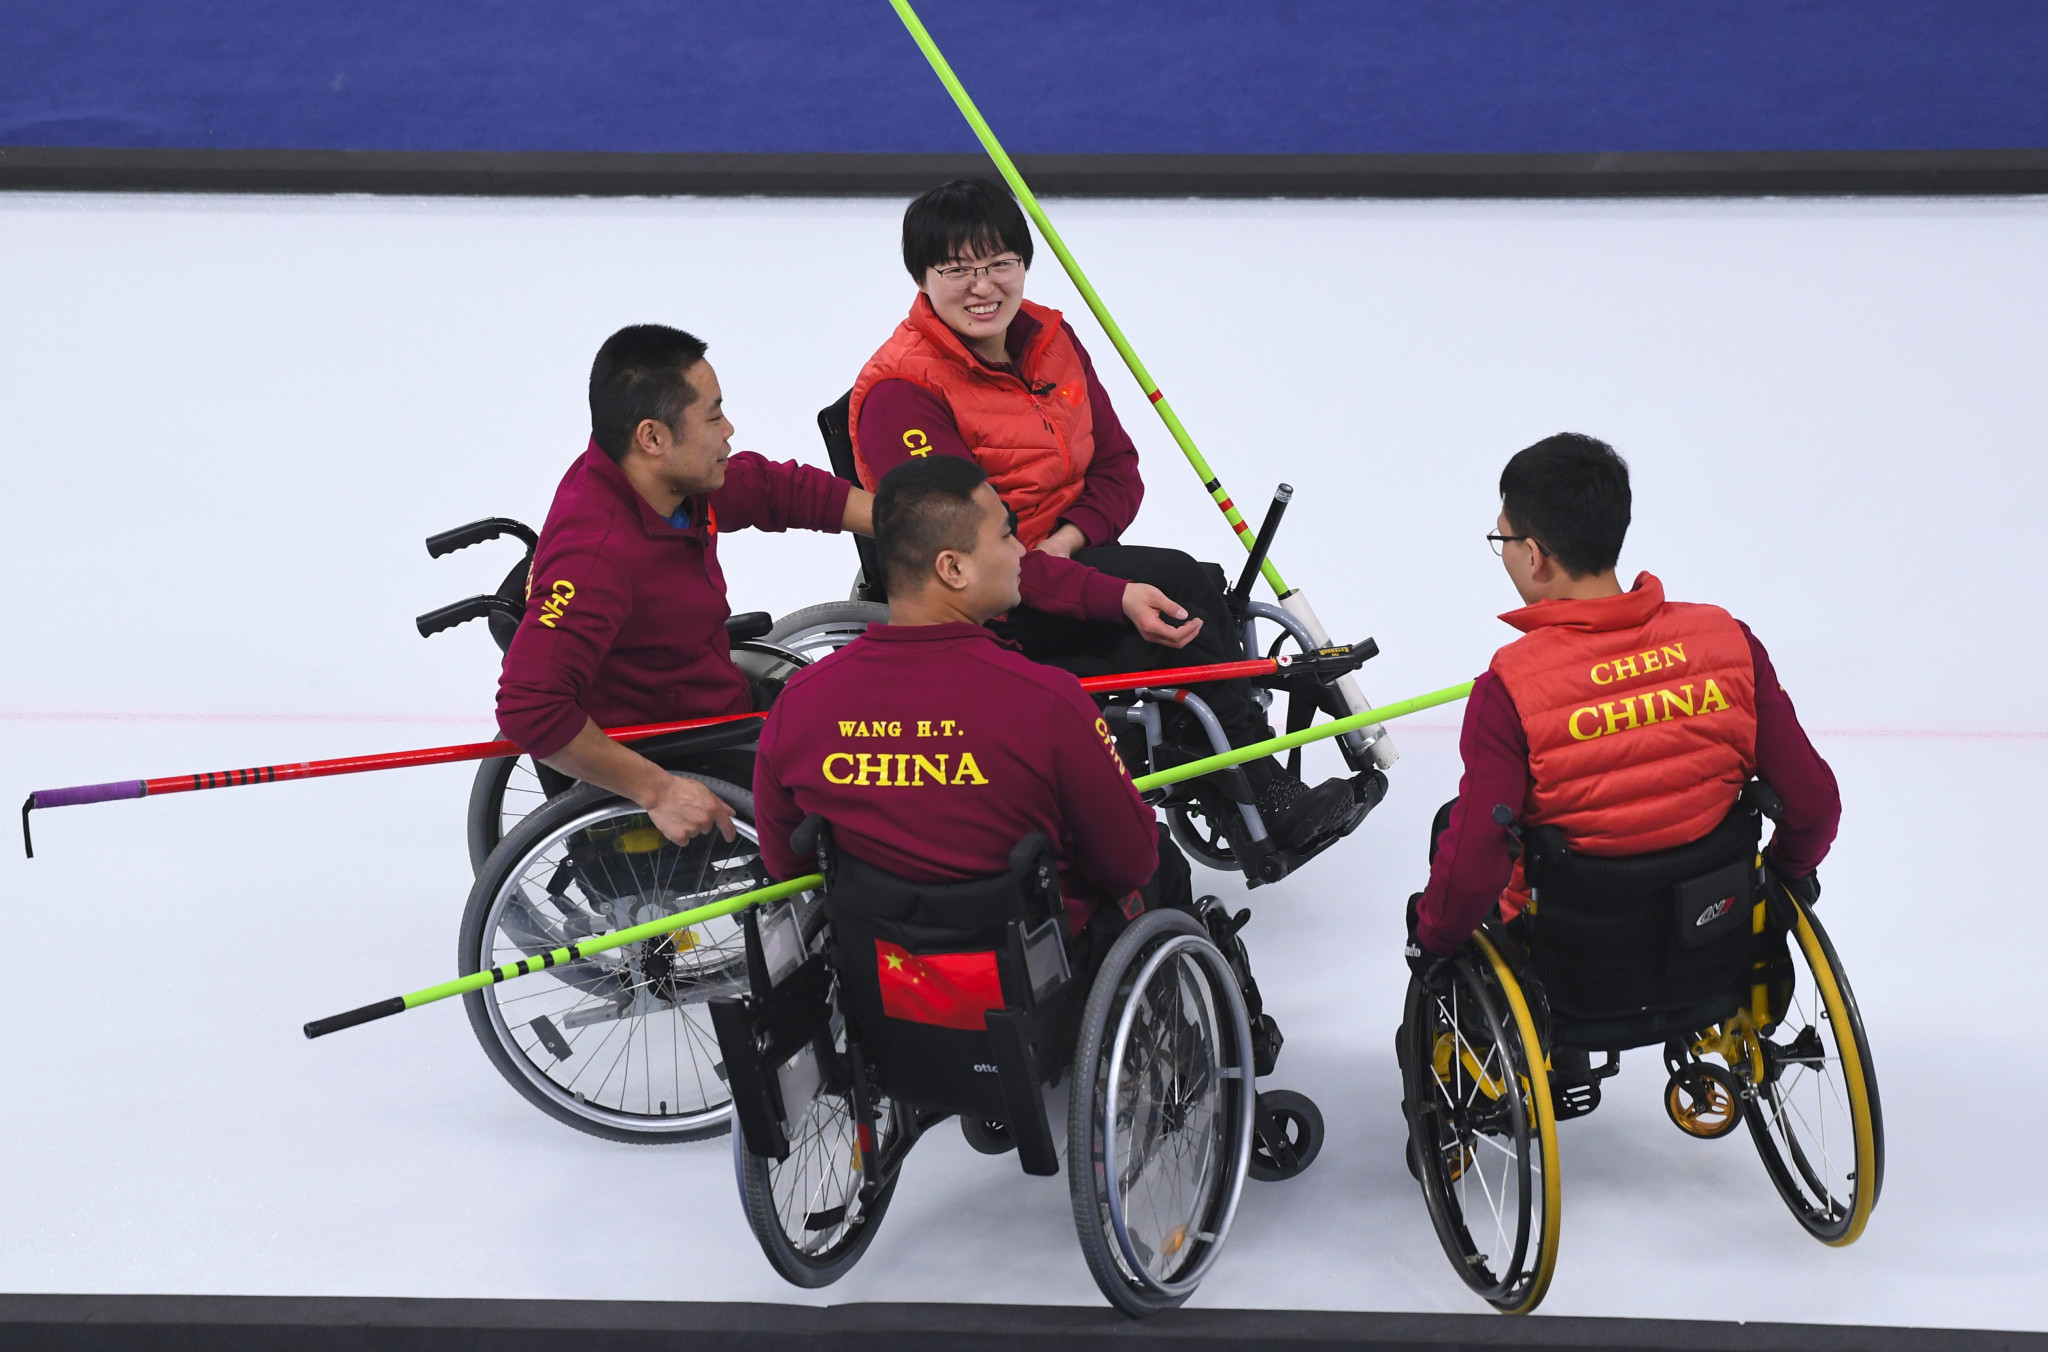 China are set to defend their World Wheelchair Curling Championship title ©Getty Images